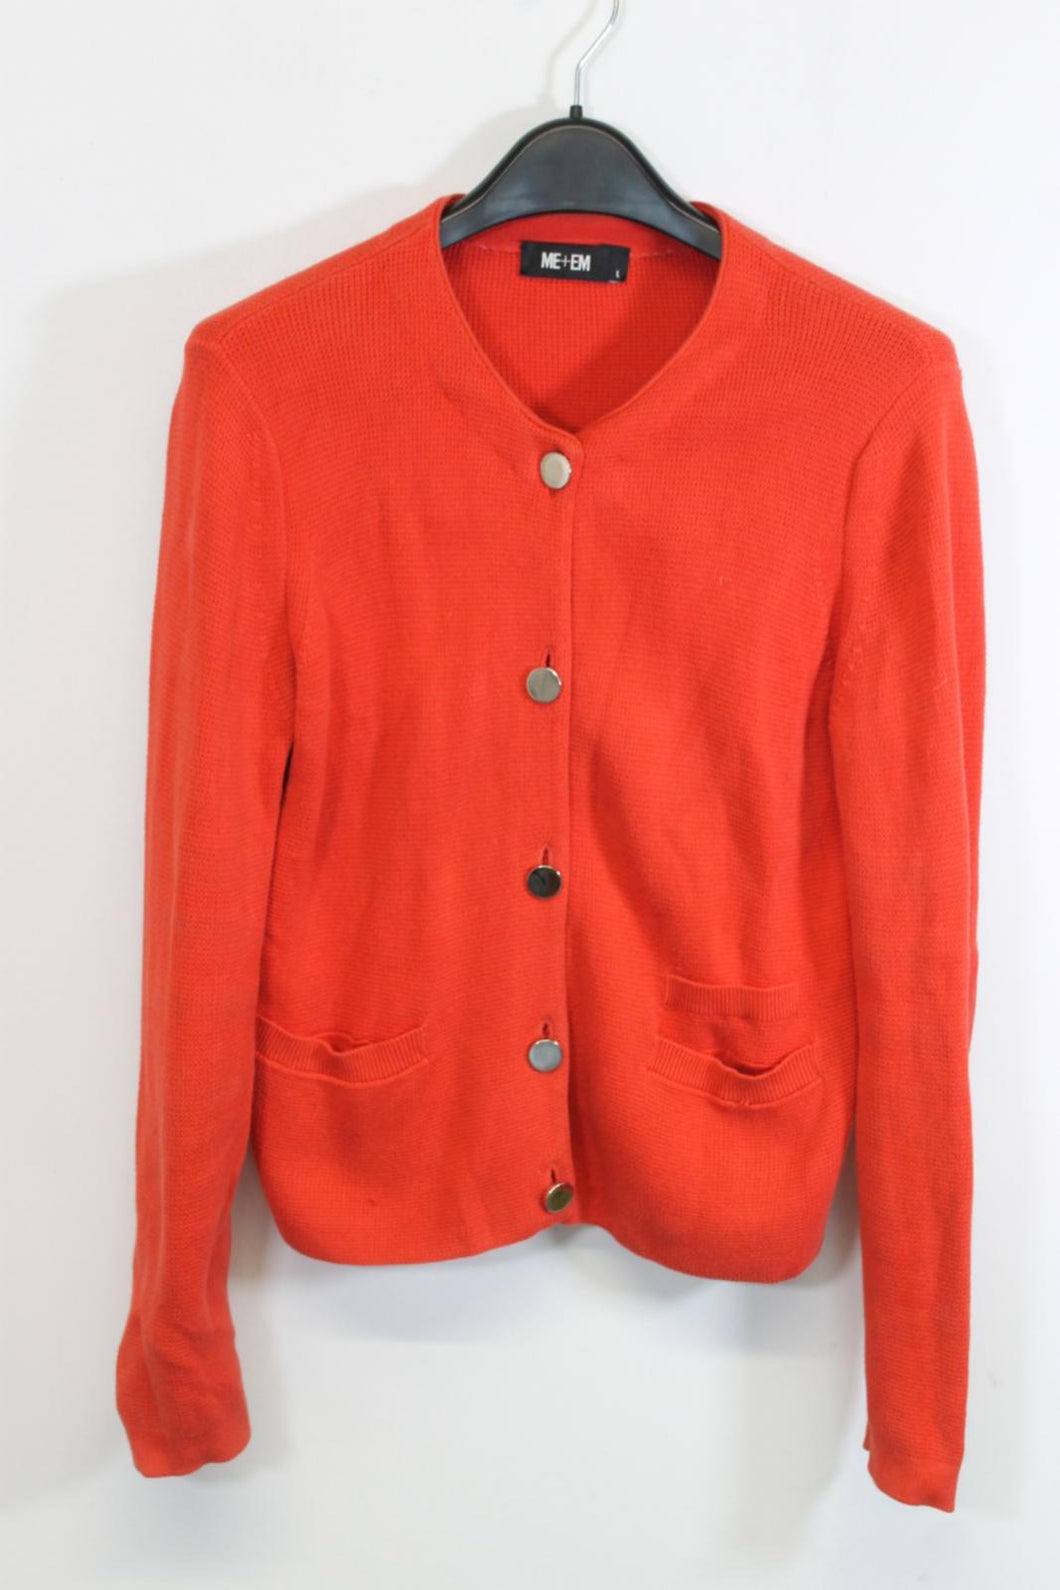 ME+EM Ladies Red Cotton Long Sleeve Knitted Cardigan Size L